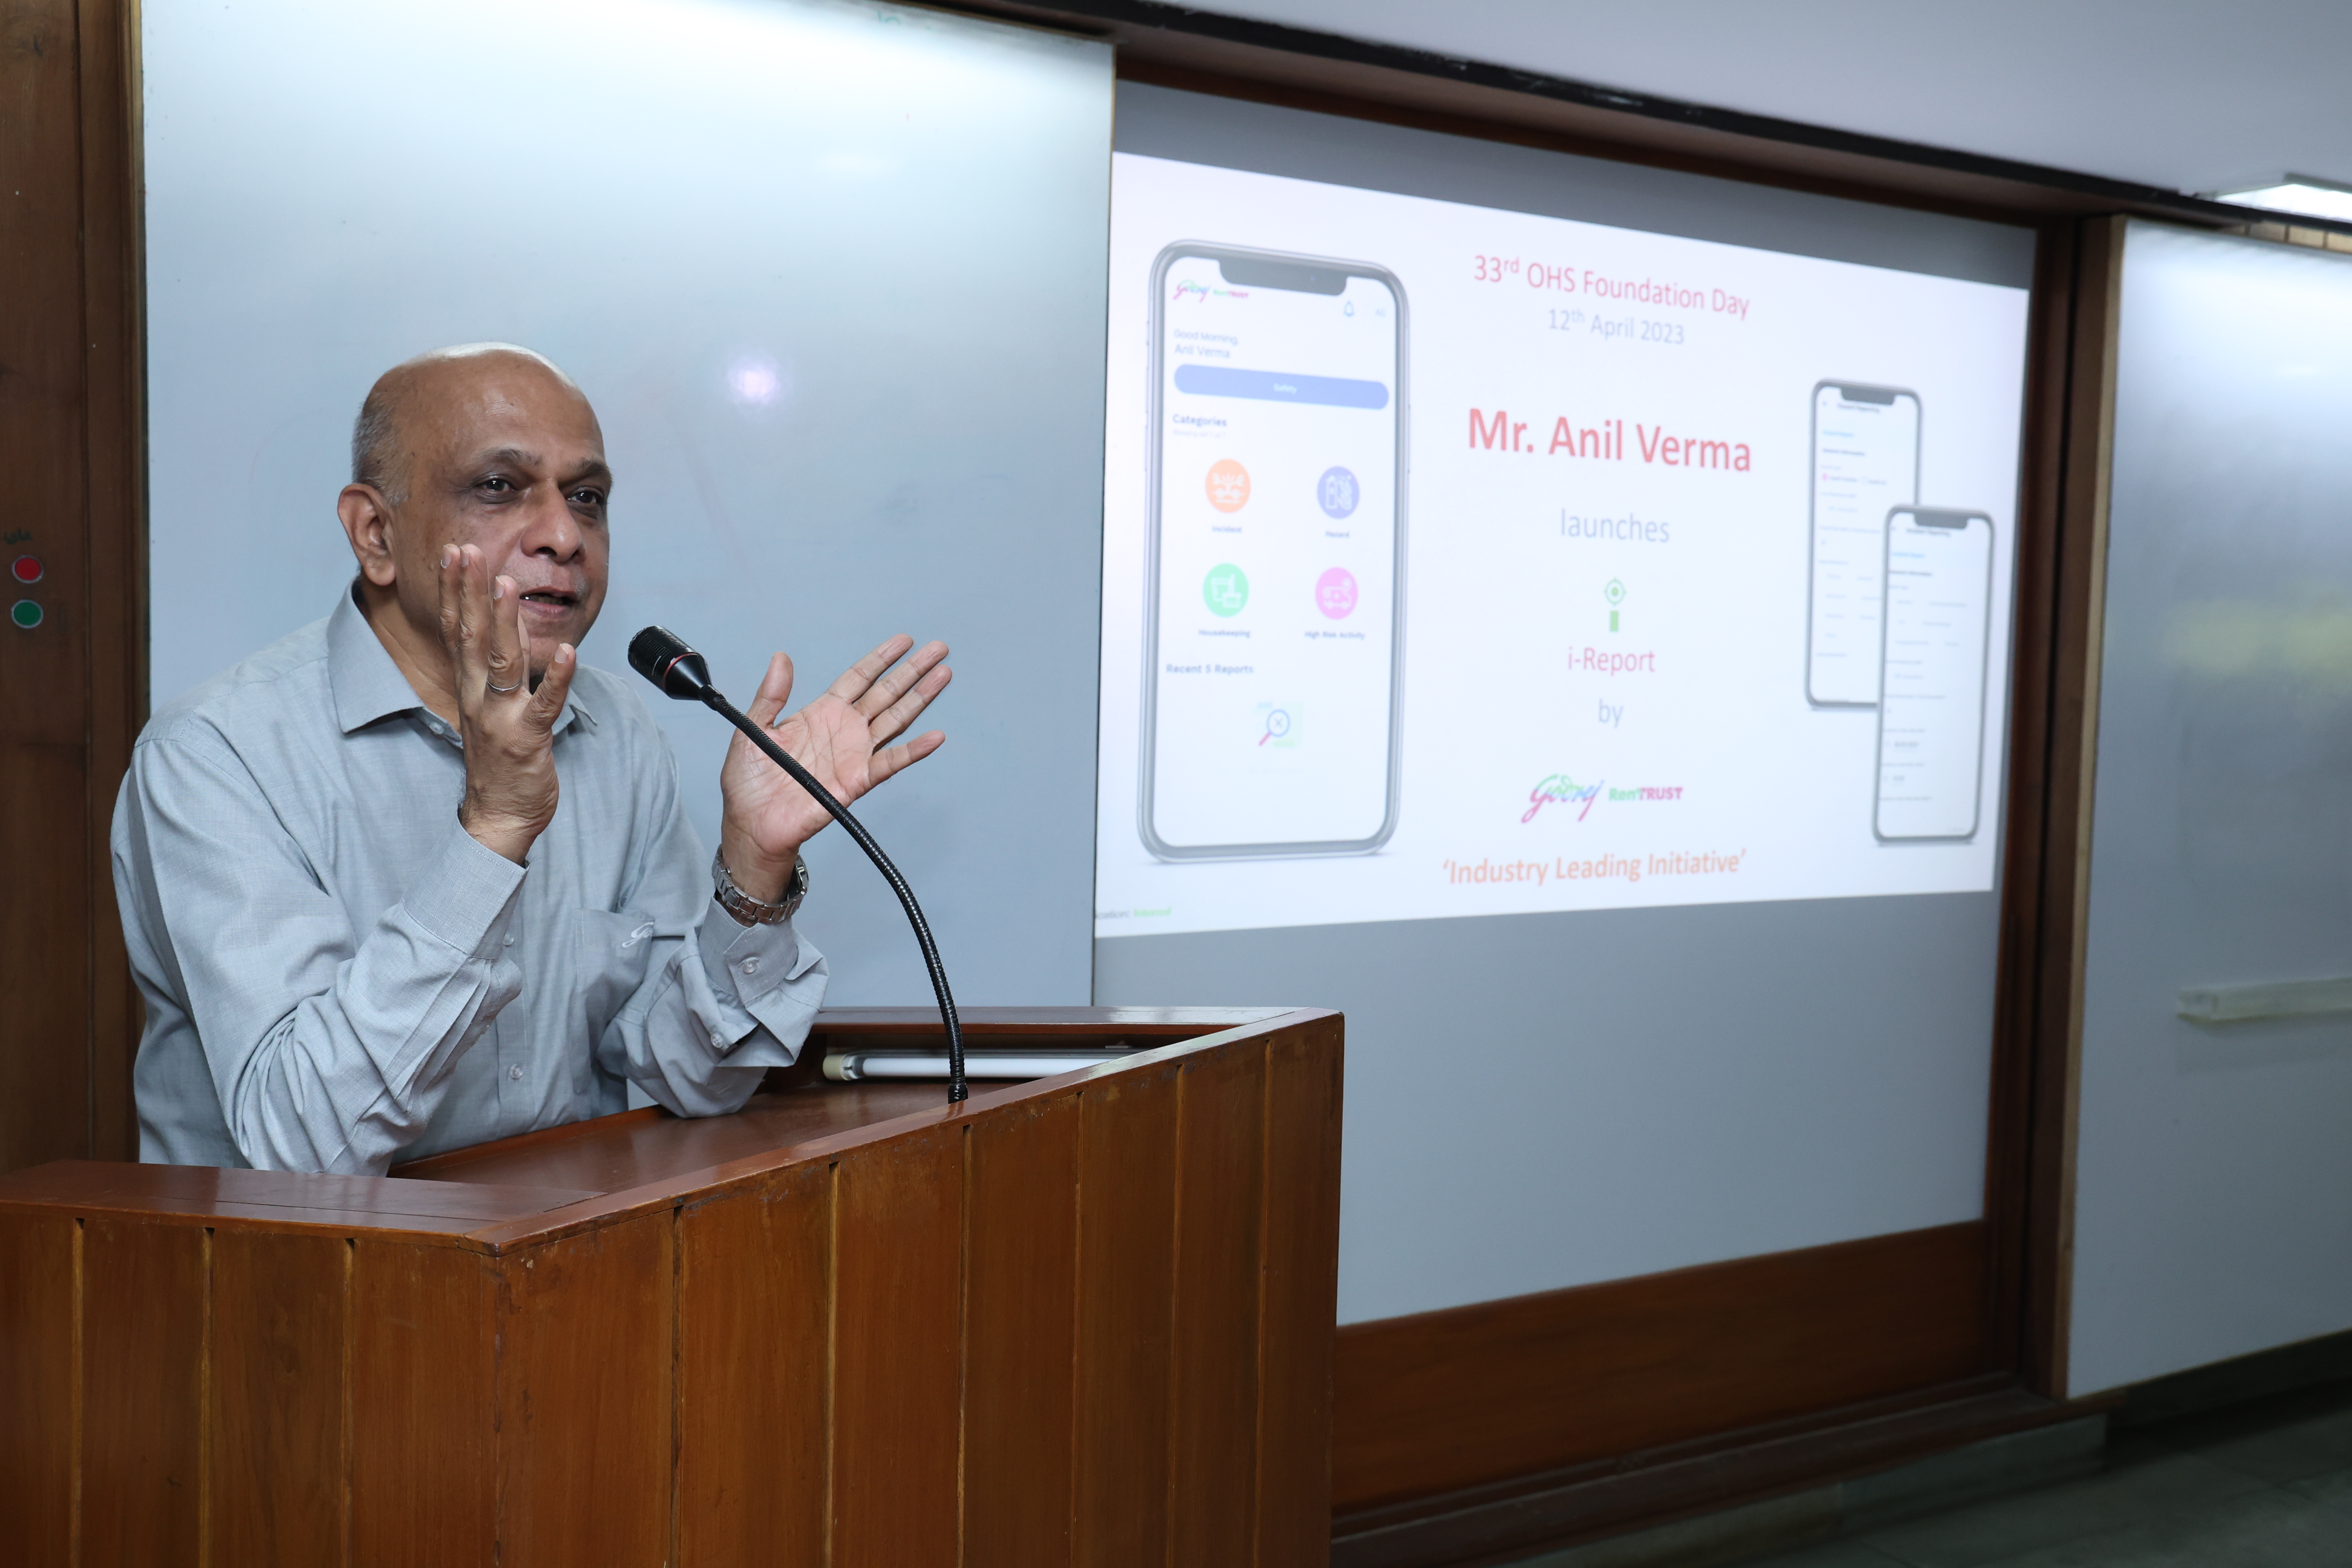 Godrej & Boyce launches Safety App ‘i-Report’ for Material Handling Operations